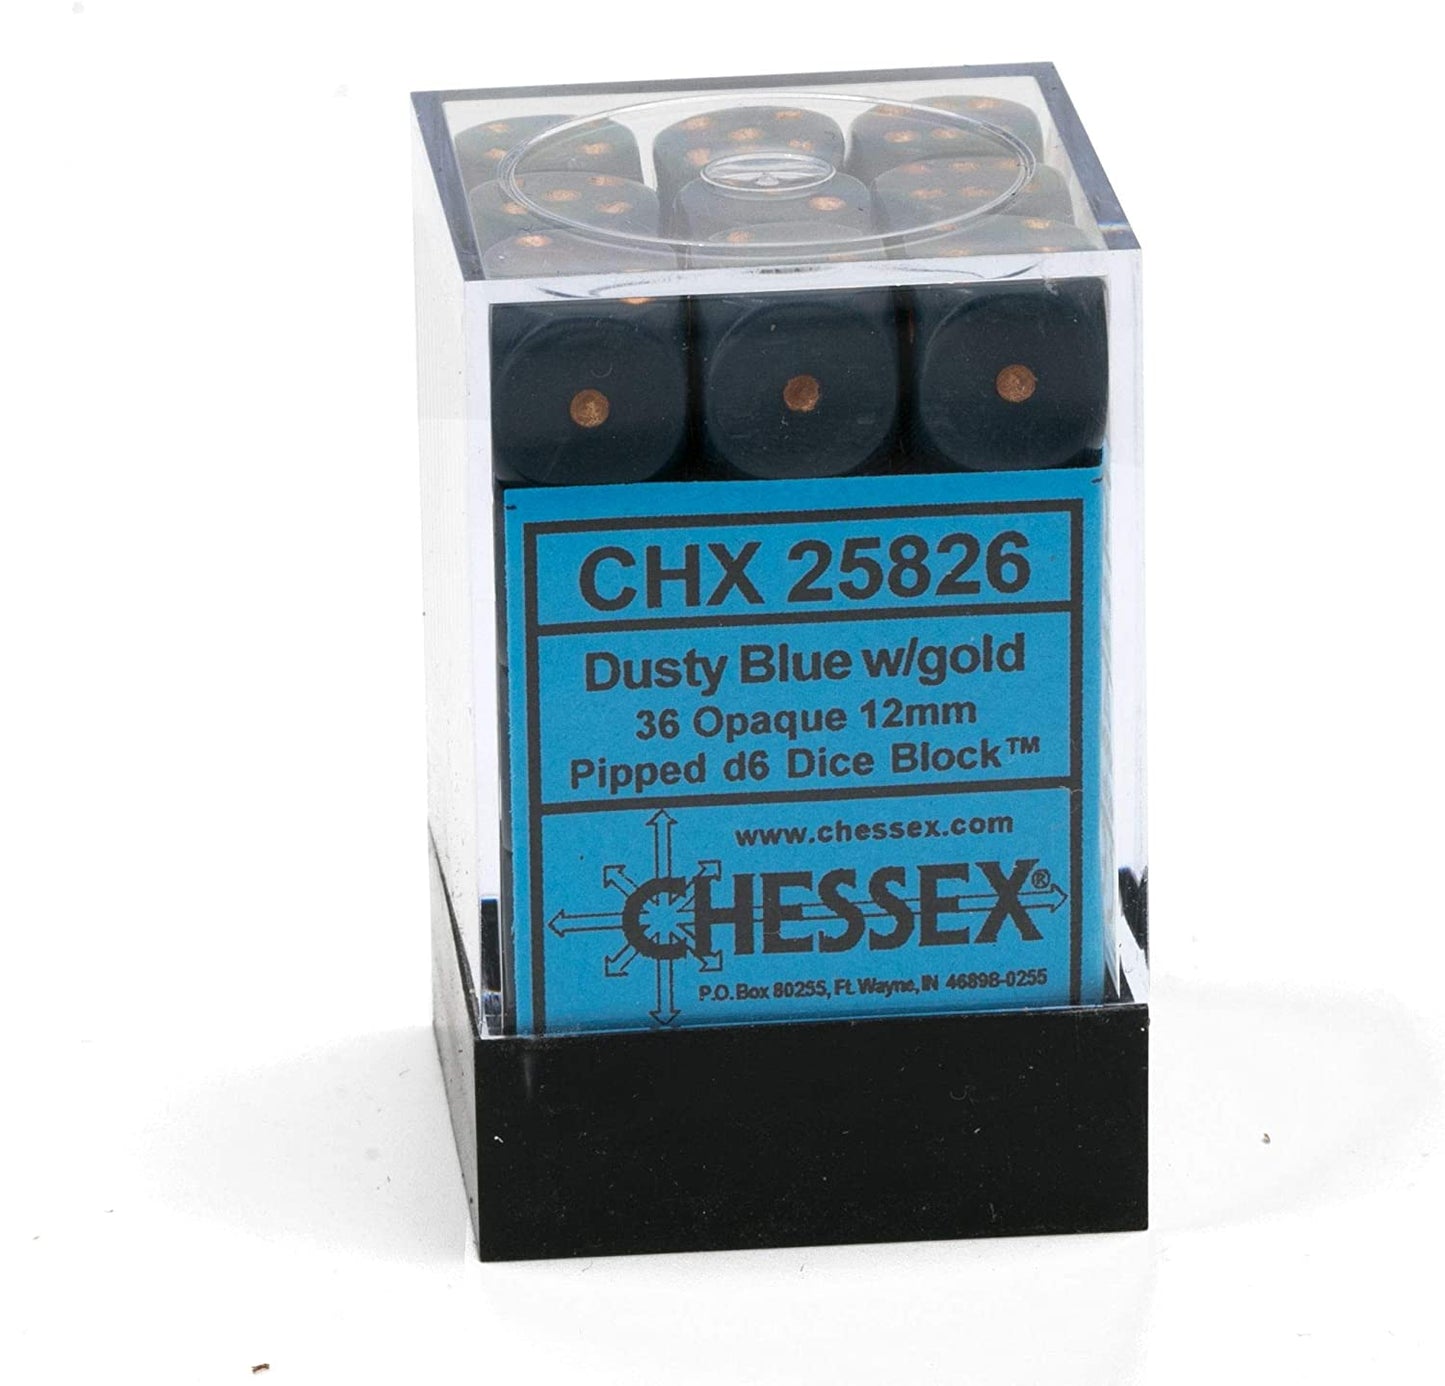 Chessex Dice: D6 Block 12mm - Opaque - Dusty Blue with Copper (CHX 25826) - Gamescape